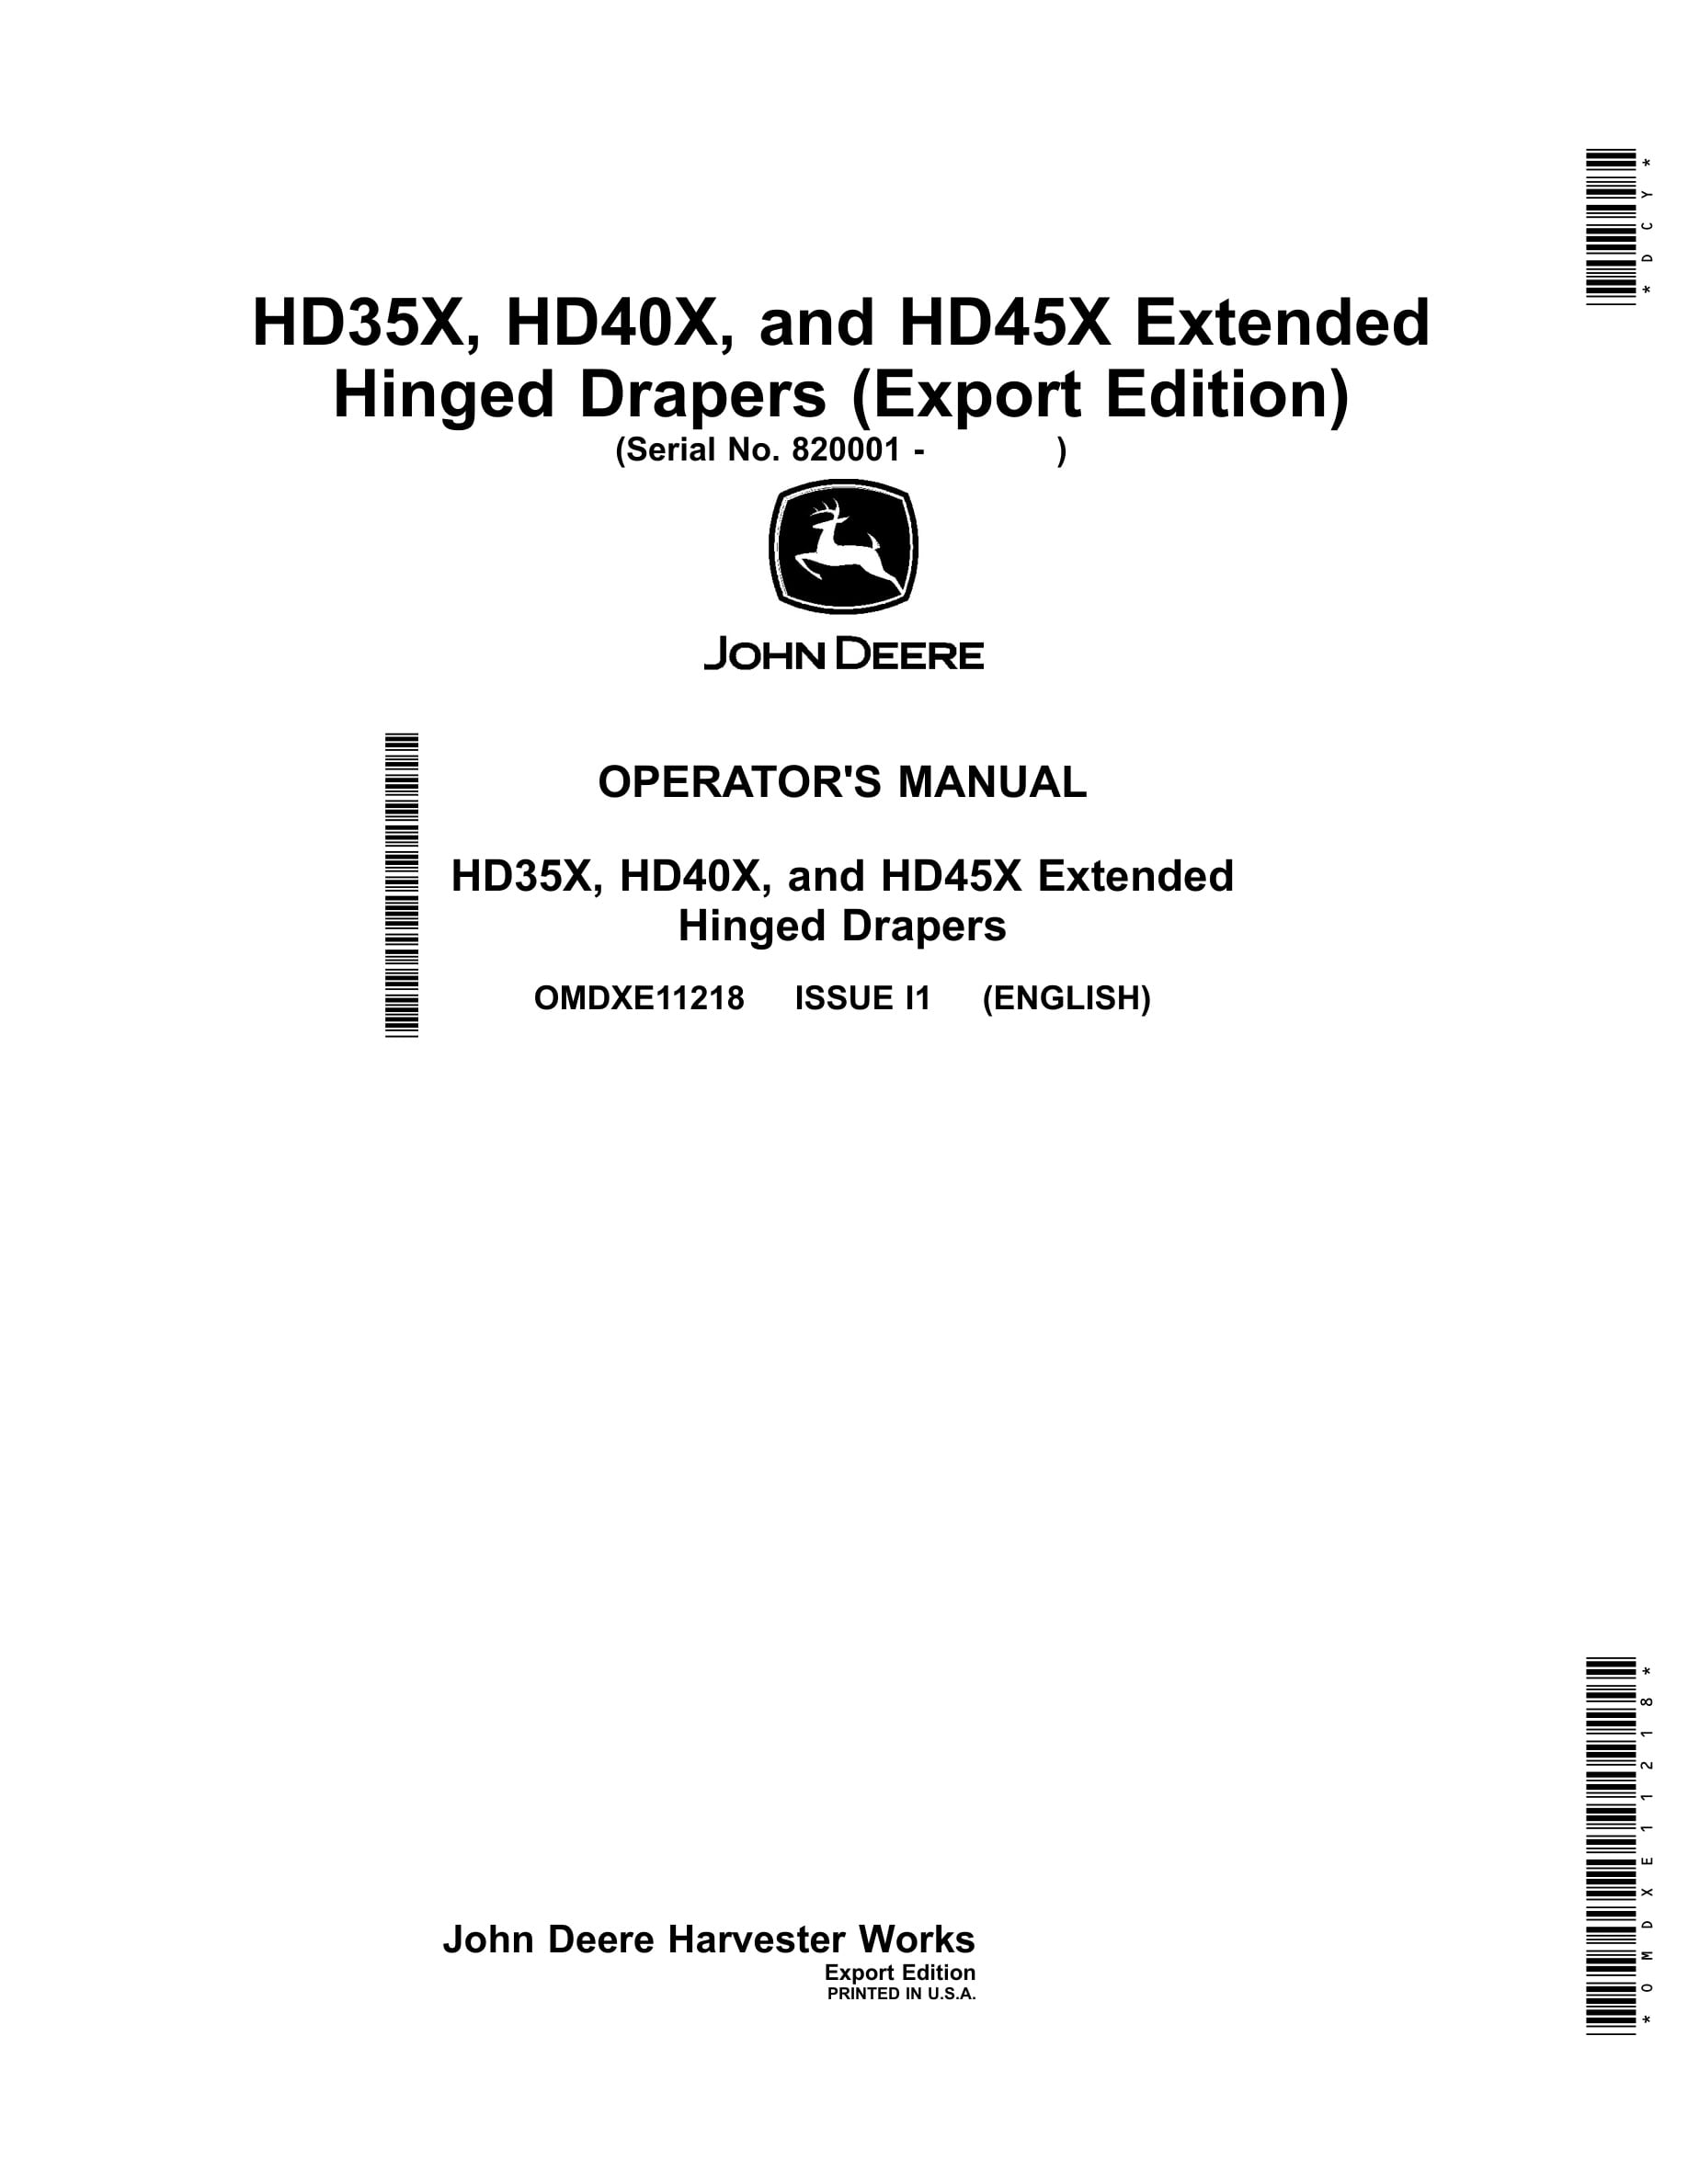 John Deere HD35X, HD40X, and HD45X Extended Hinged Drapers Operator Manual OMDXE11218-1